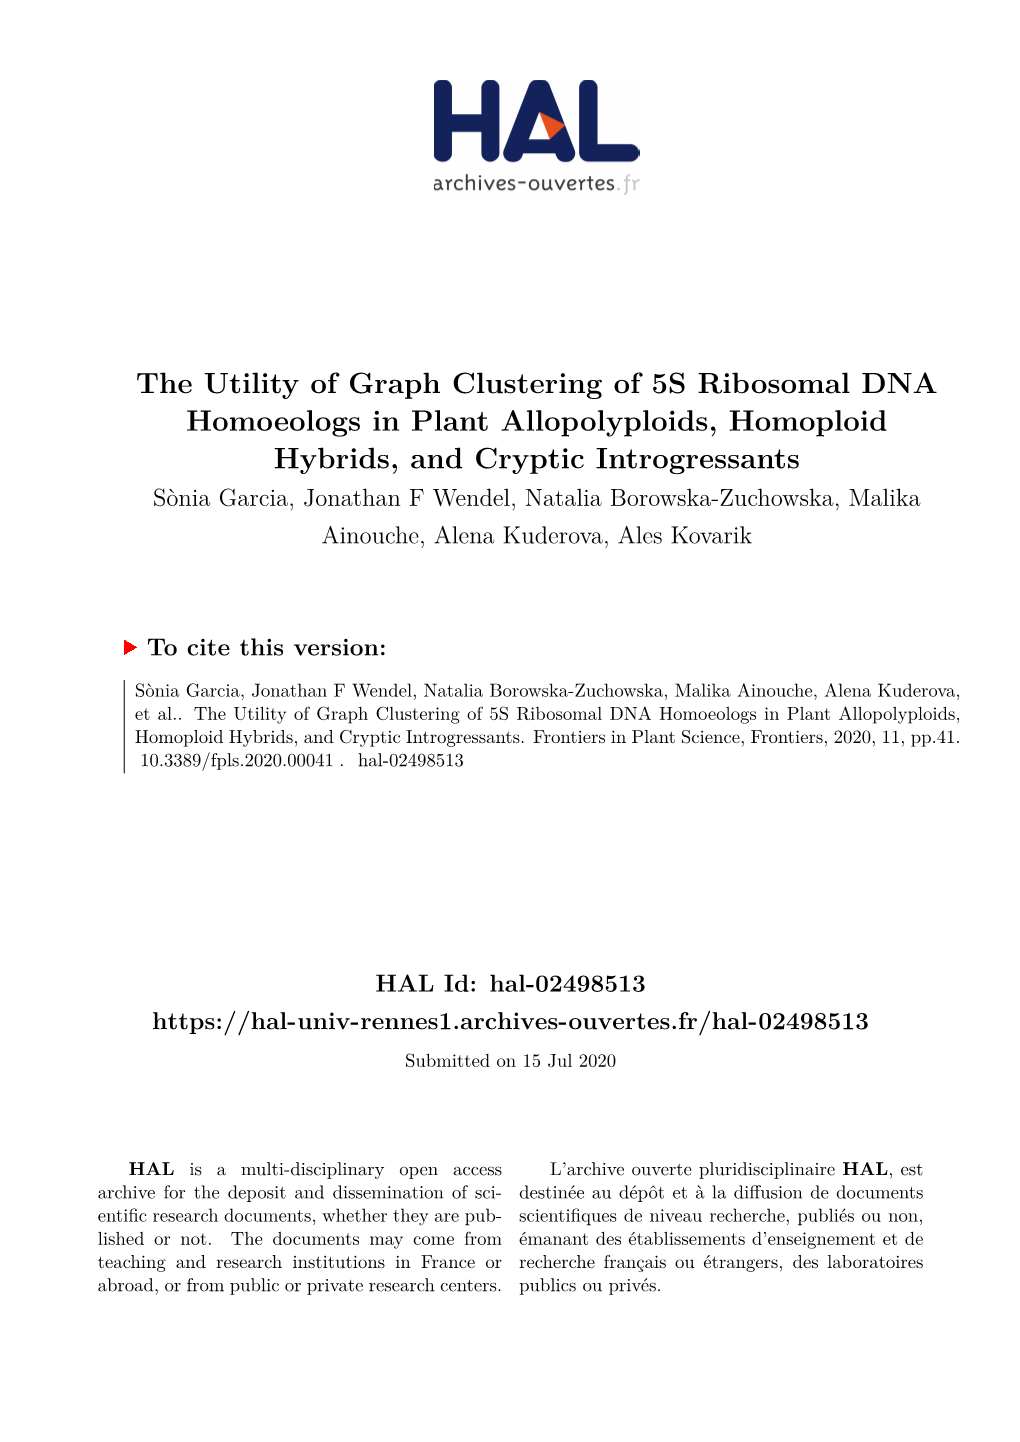 The Utility of Graph Clustering of 5S Ribosomal DNA Homoeologs In